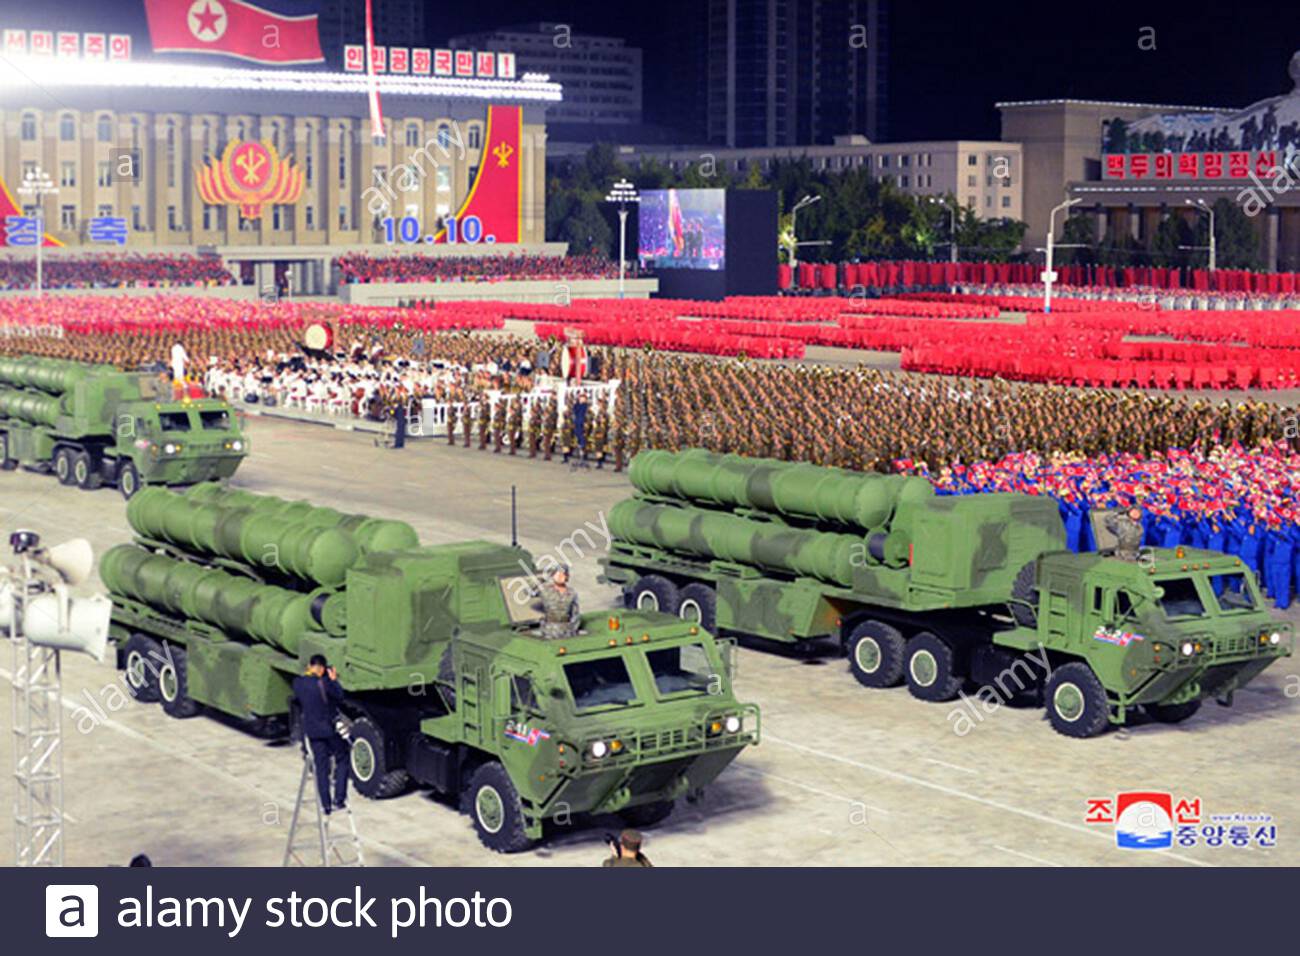 pyongyang-north-korea-10th-oct-2020-this-image-released-on-october-10-2020-by-the-north-korean-official-news-service-kcna-shows-north-korean-leader-kim-jong-un-during-a-military-parade-marking-the-75th-anniversary-of-the-countrys-ruling-workers-party-of-korea-photo-by-kcnaupi-credit-upialamy-live-news-2D4RKP7.jpg